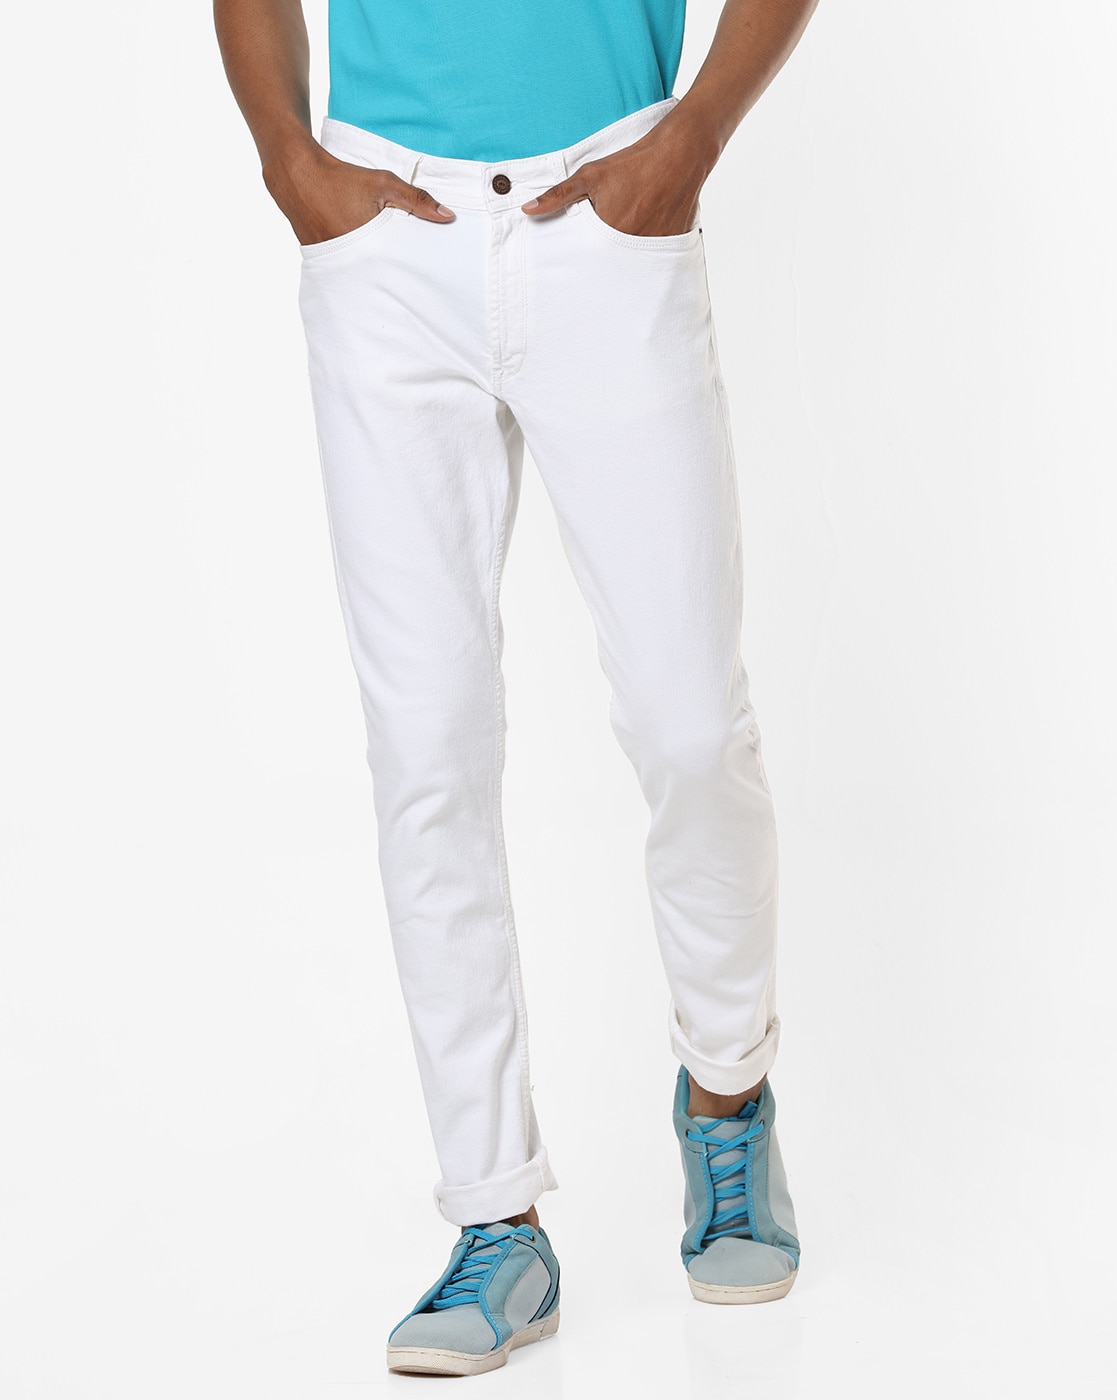 relaxed fit white jeans